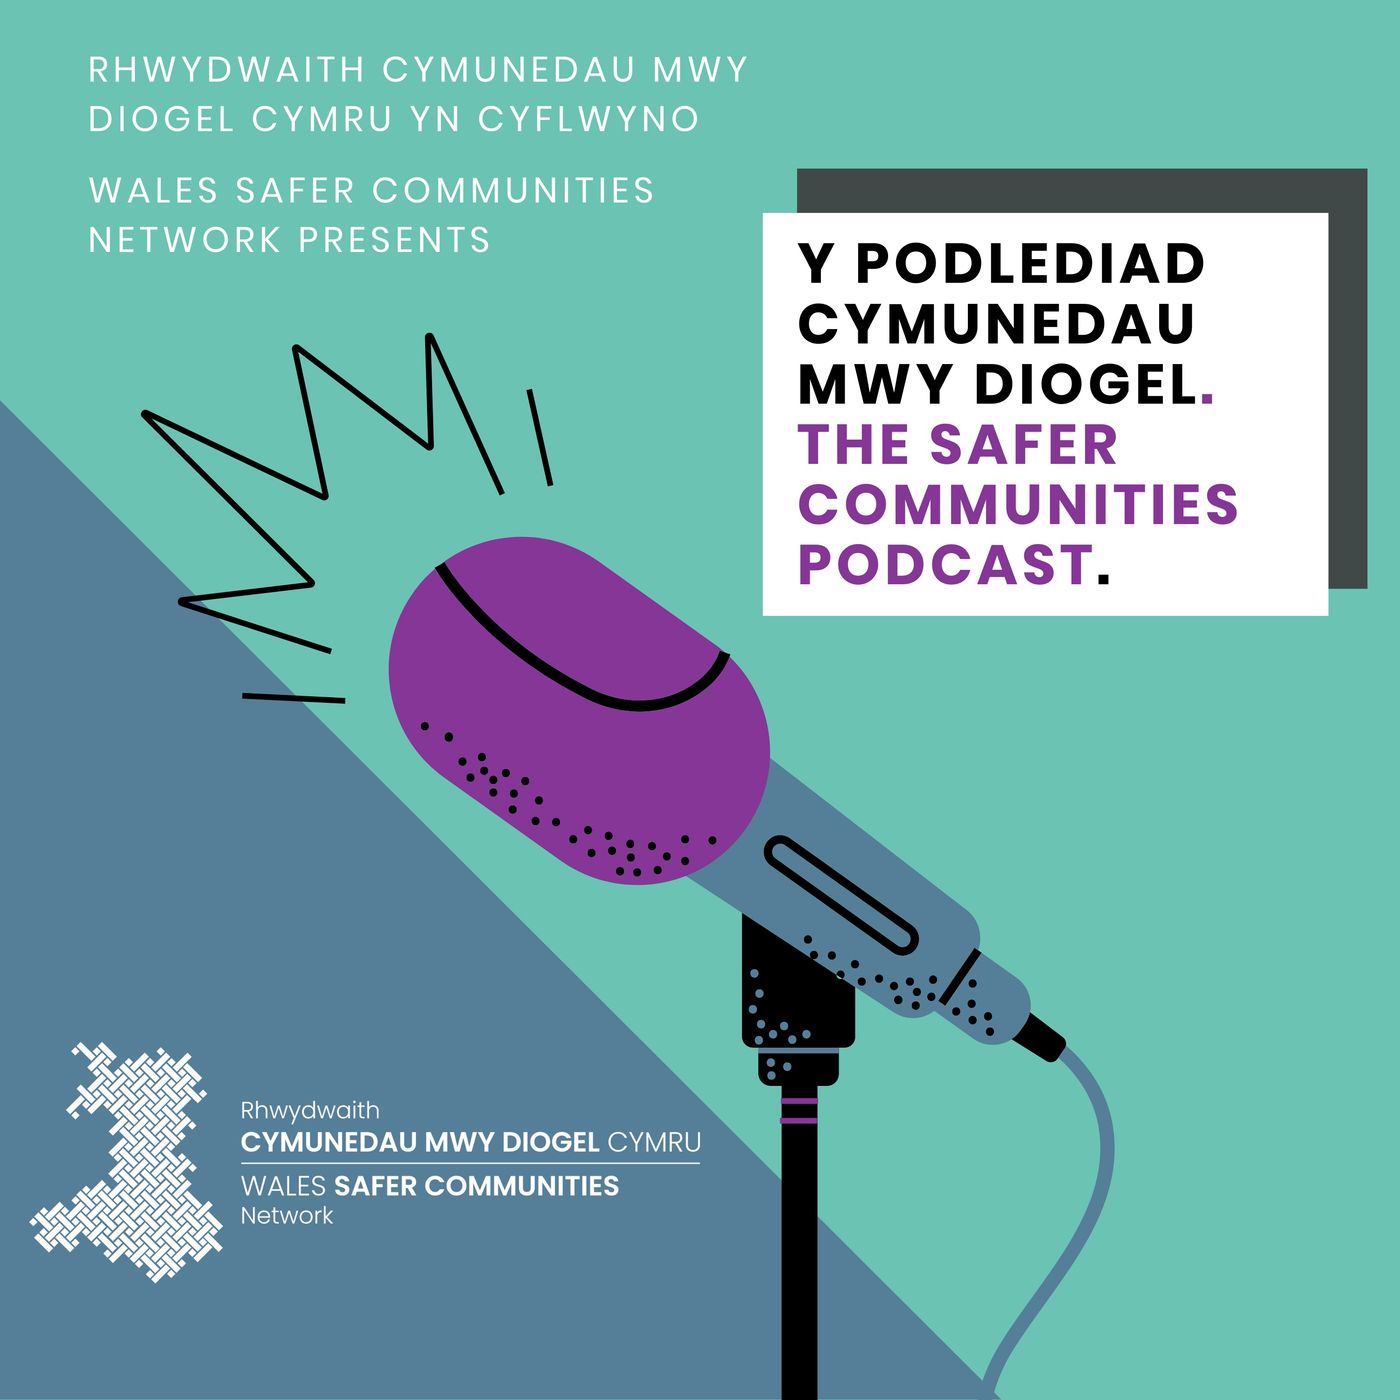 Wales Safer Communities Network